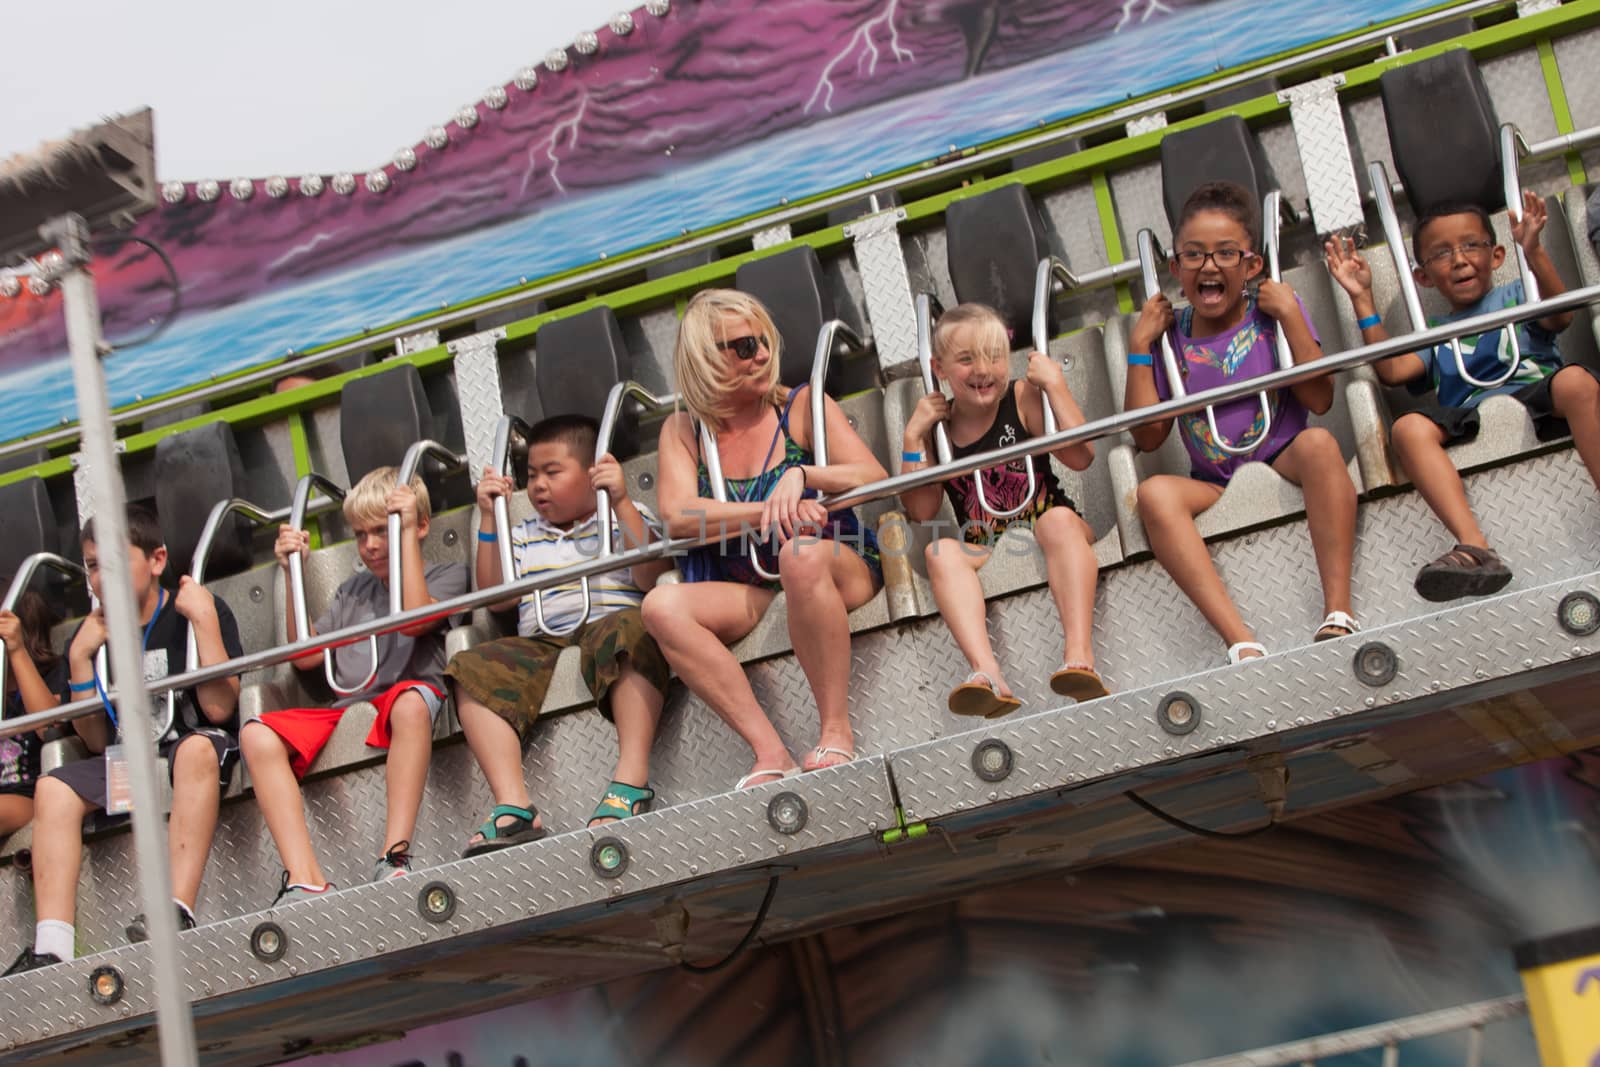 DES MOINES, IA /USA - AUGUST 10: Unidentified people enjoy a carnival thrill ride at the Iowa State Fair on August 10, 2014 in Des Moines, Iowa, USA.